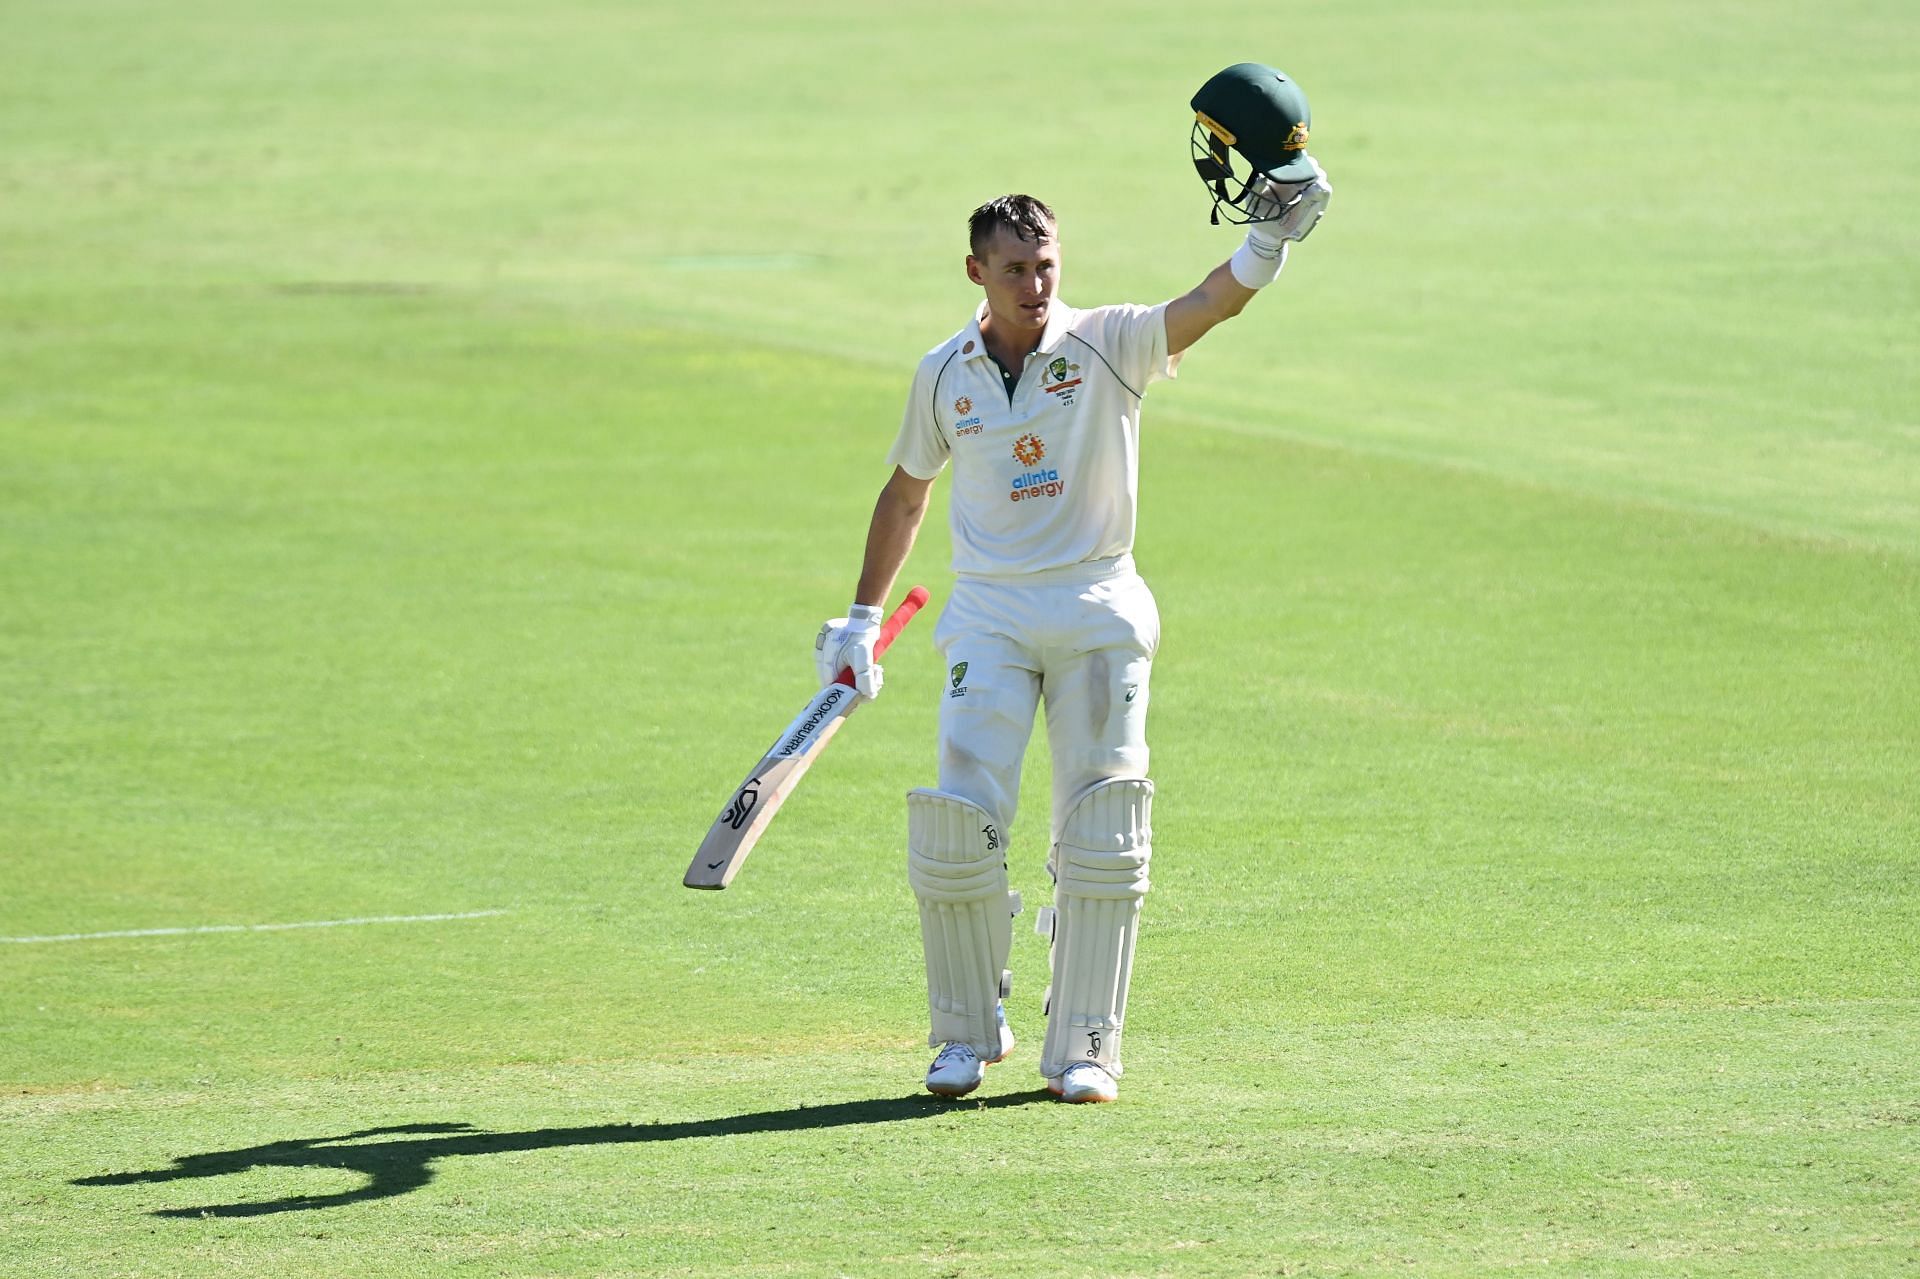 Marnus Labuschagne could bring in a fresh and courageous attitude to the Aussie Test squad with his leadership in the post-Tim Paine era